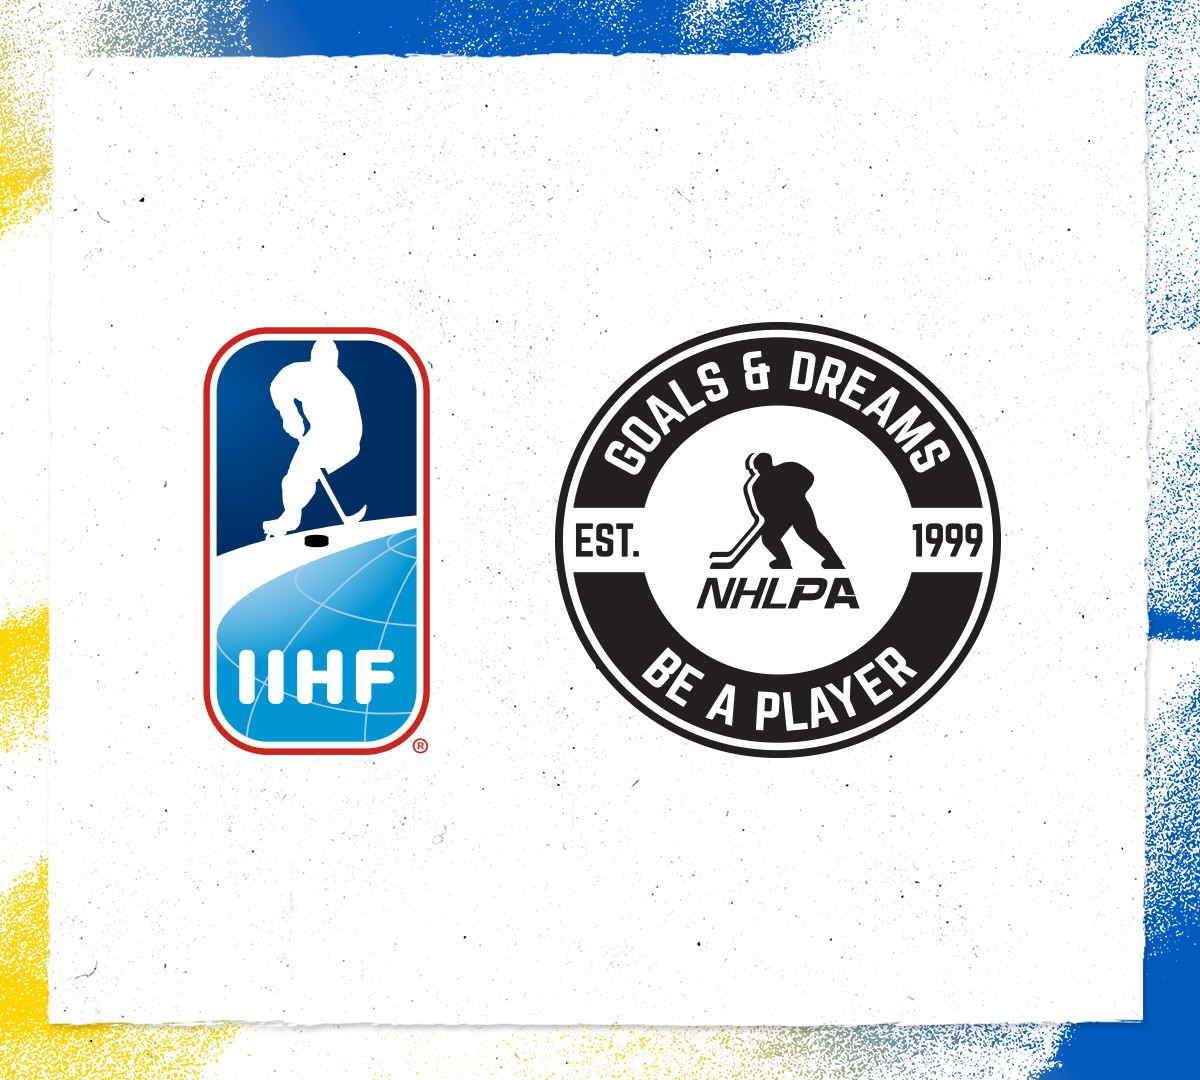 The NHLPA has joined forces with the IIHF to launch the NHLPA Goals & Dreams fund for Ukrainian refugees ©IIHF